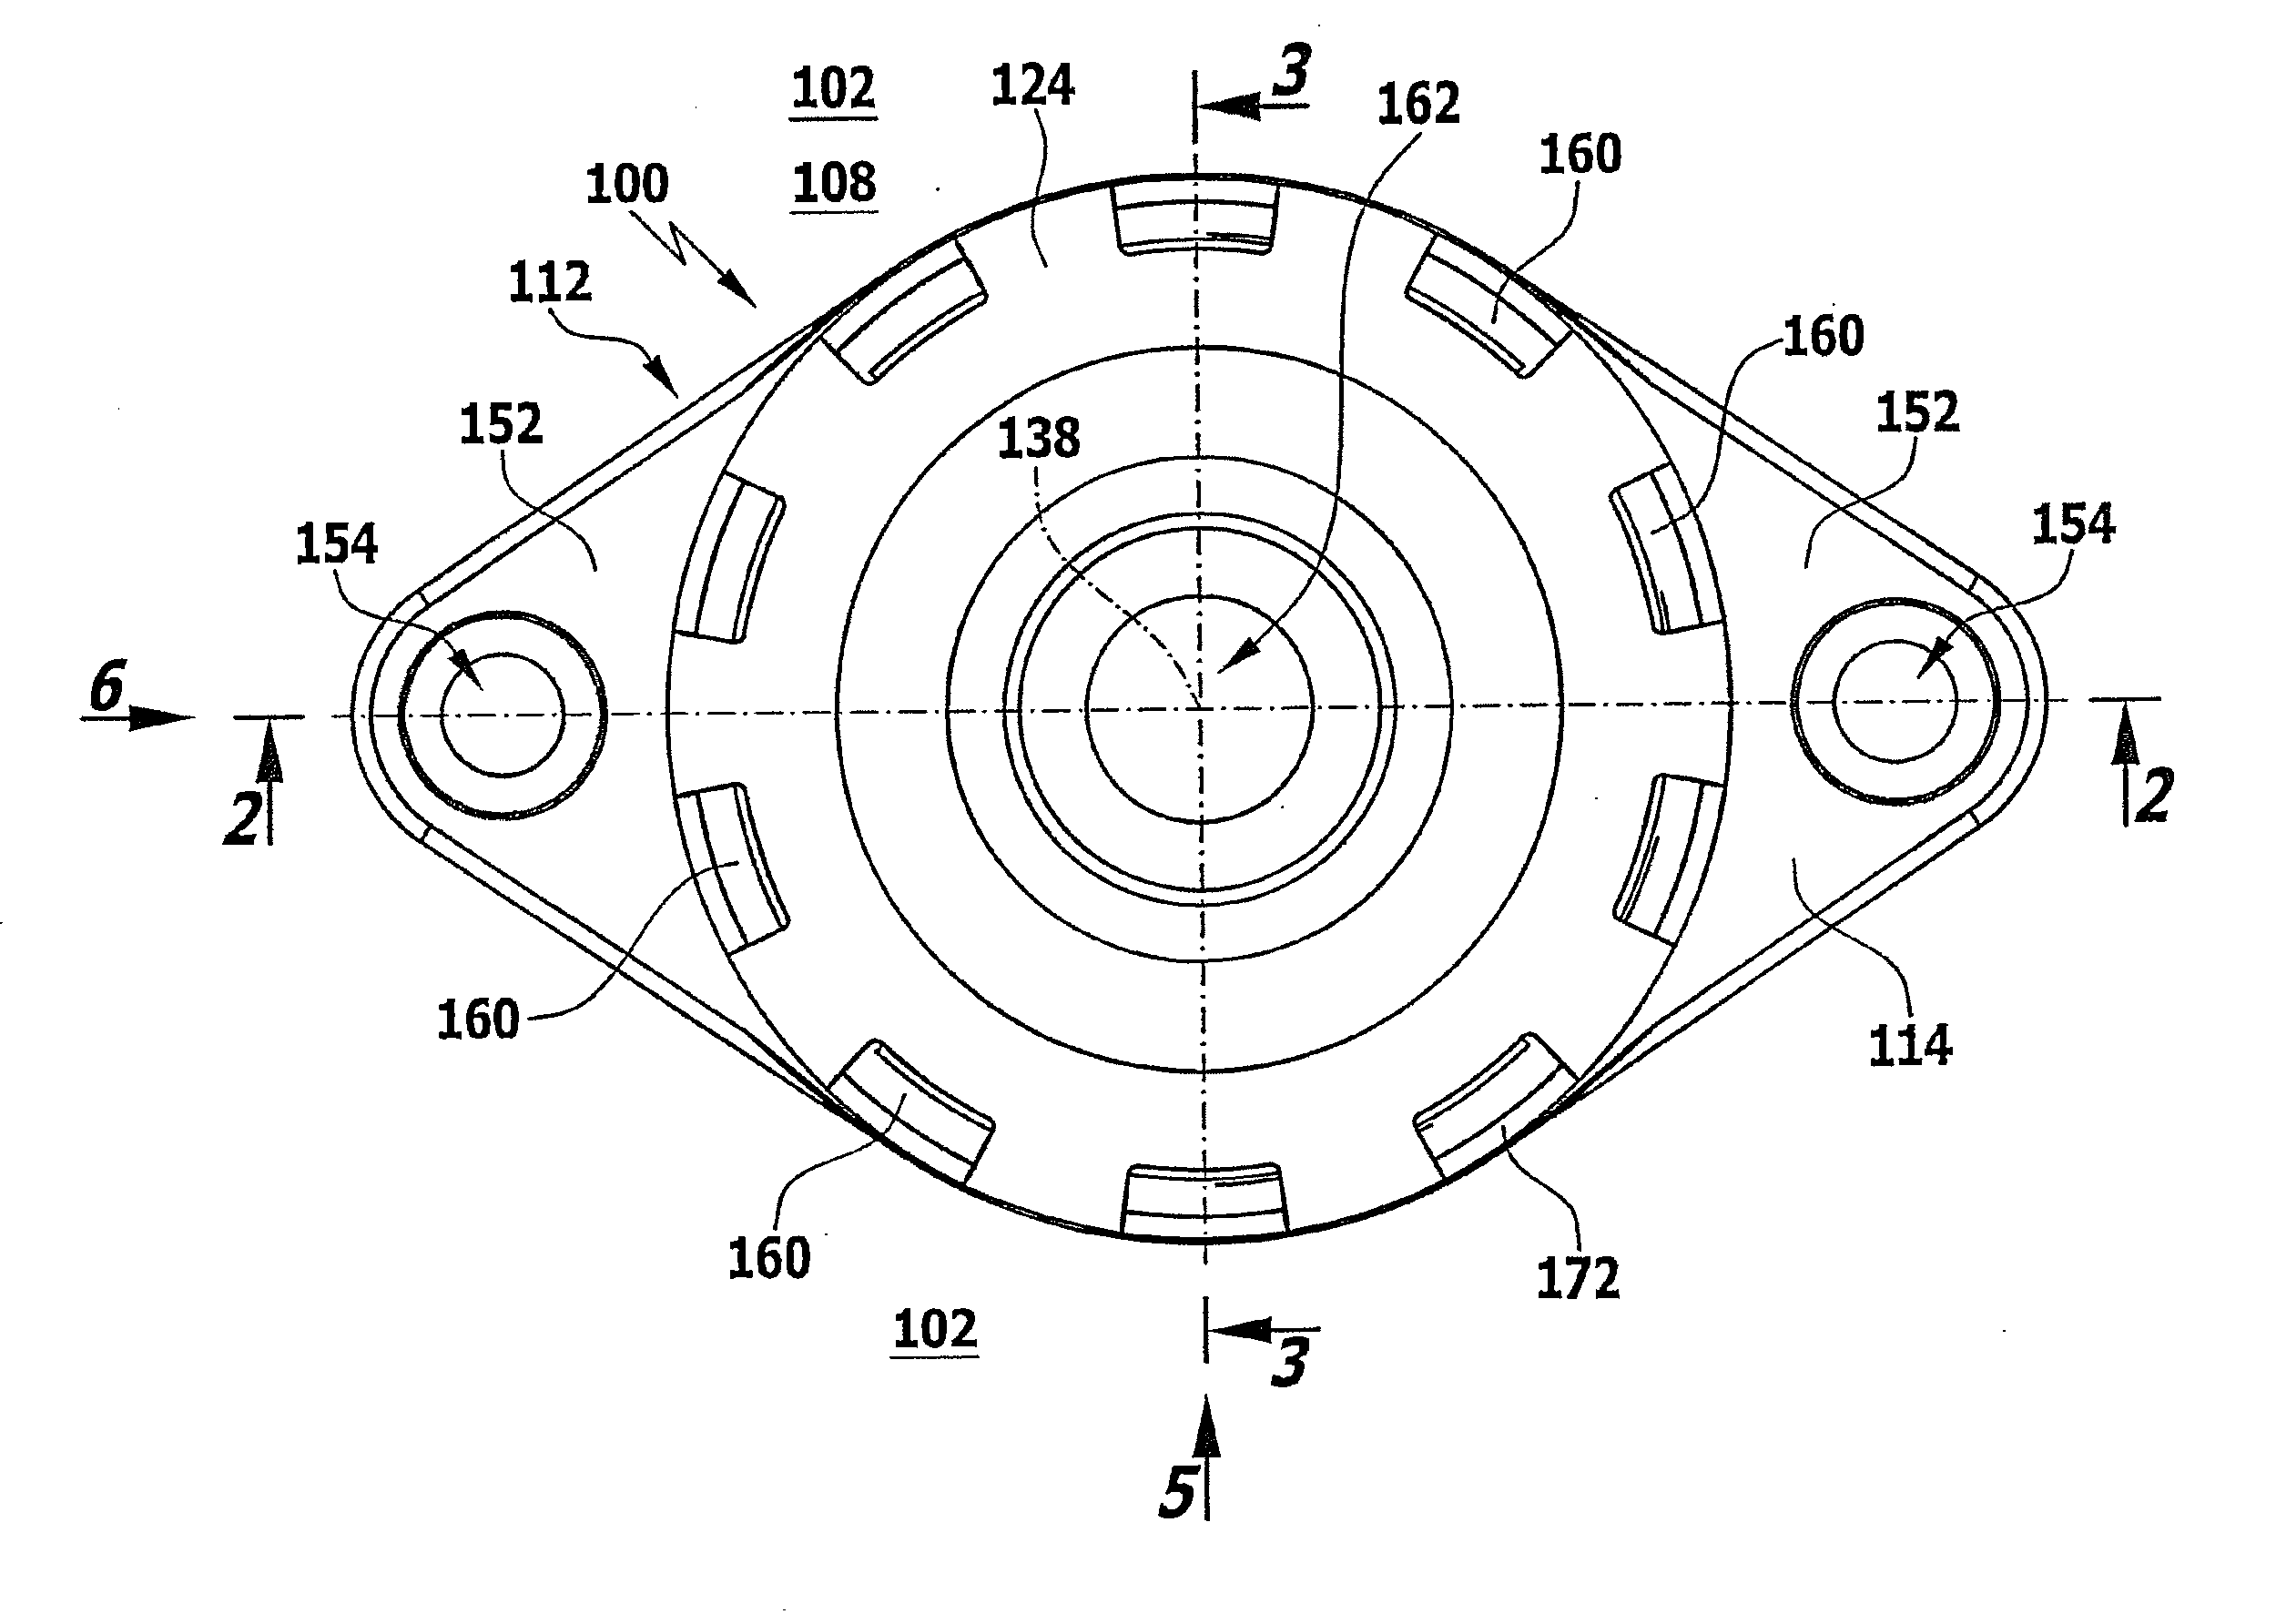 Pressure compensation device for a housing of an electrochemical device